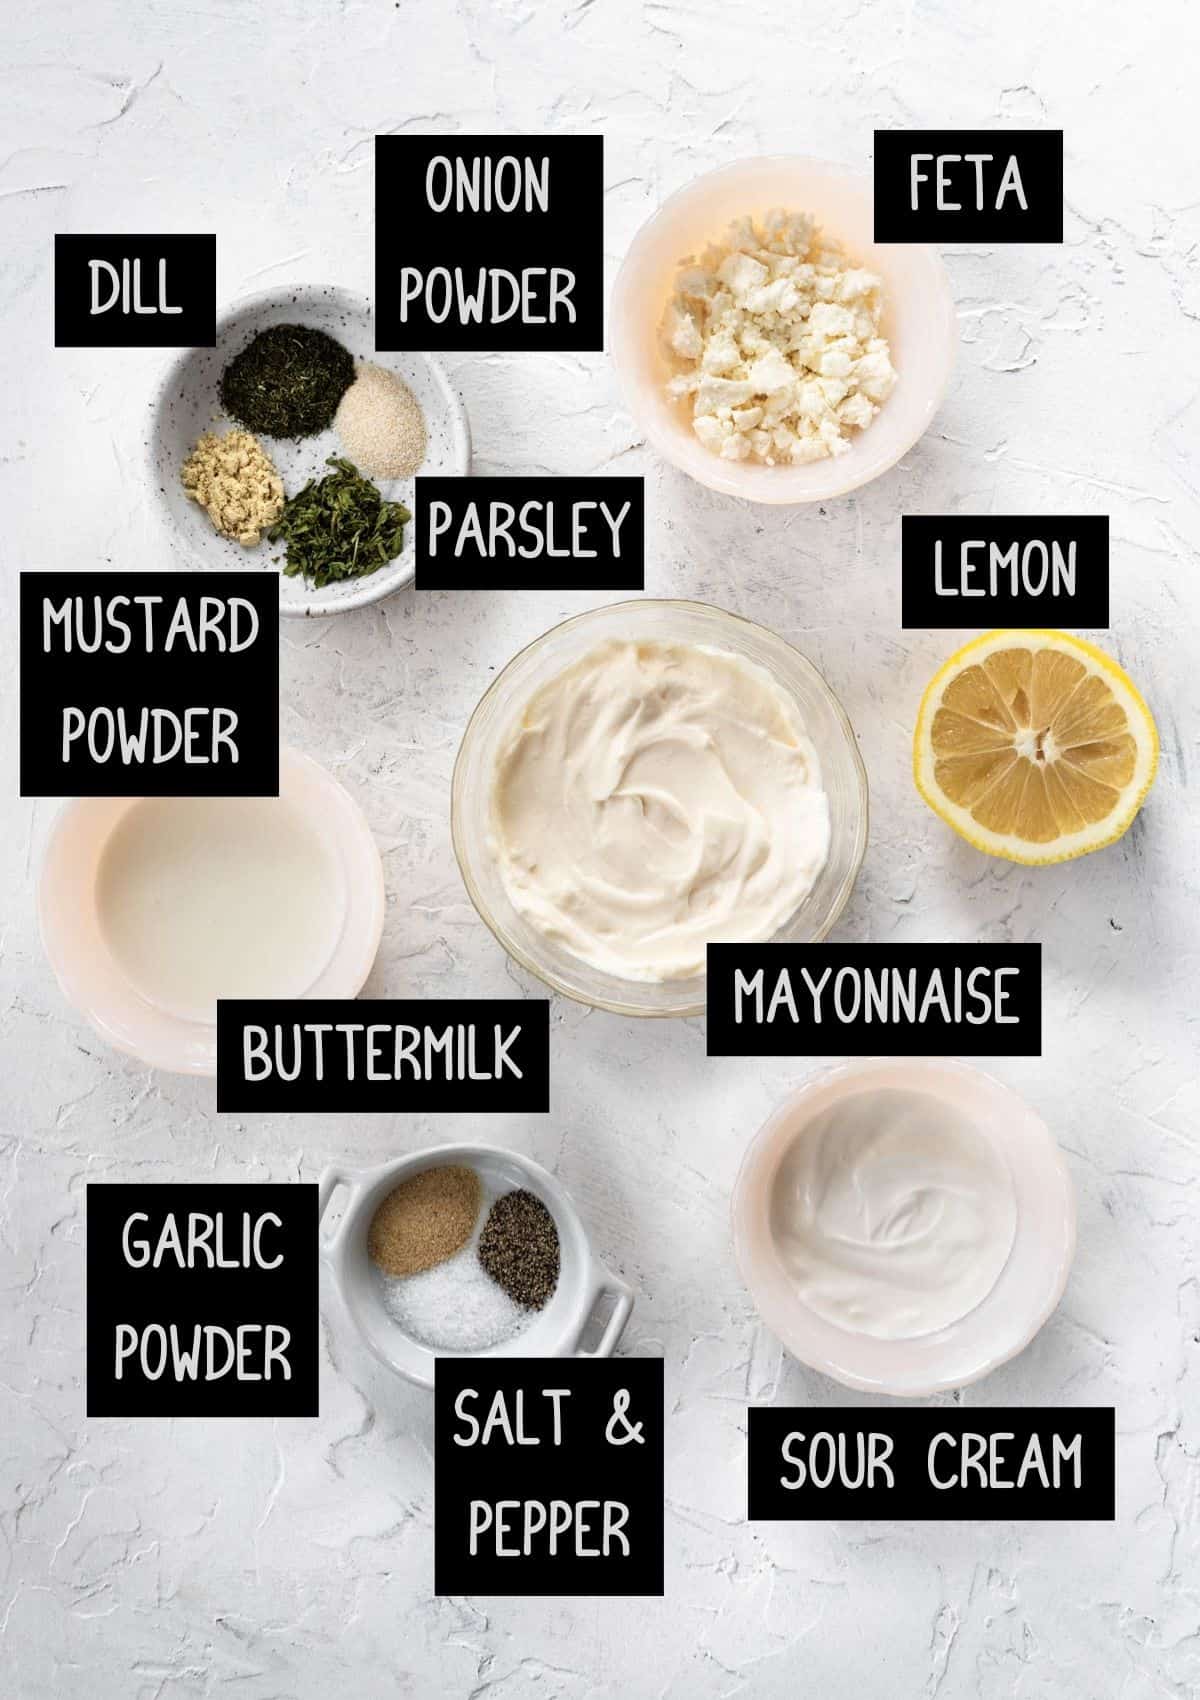 Labelled ingredients for feta ranch dressing (see recipe for details).